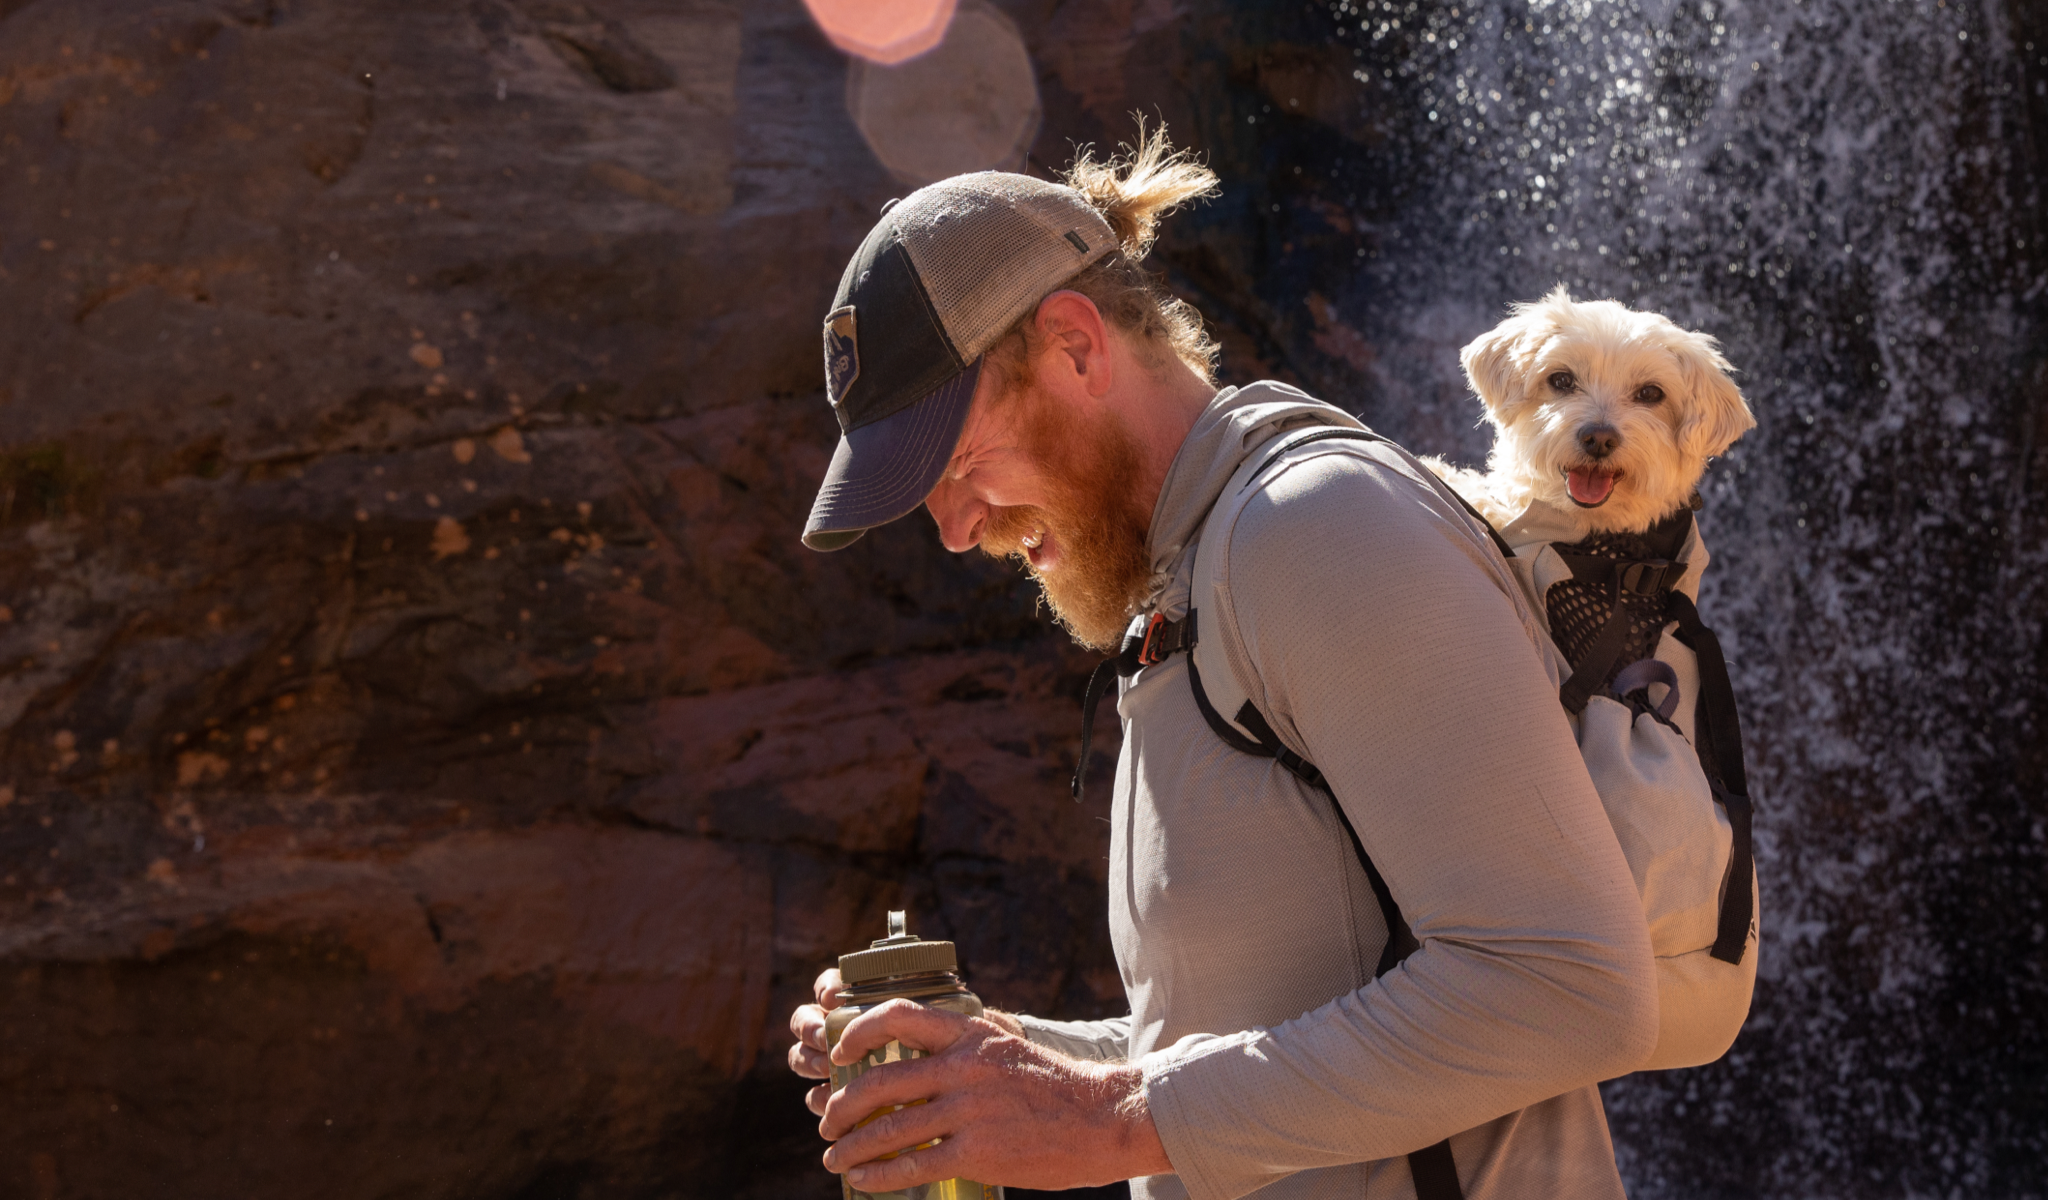 A man wears his dog on his back in an AIR2 backpack next to a waterfall.